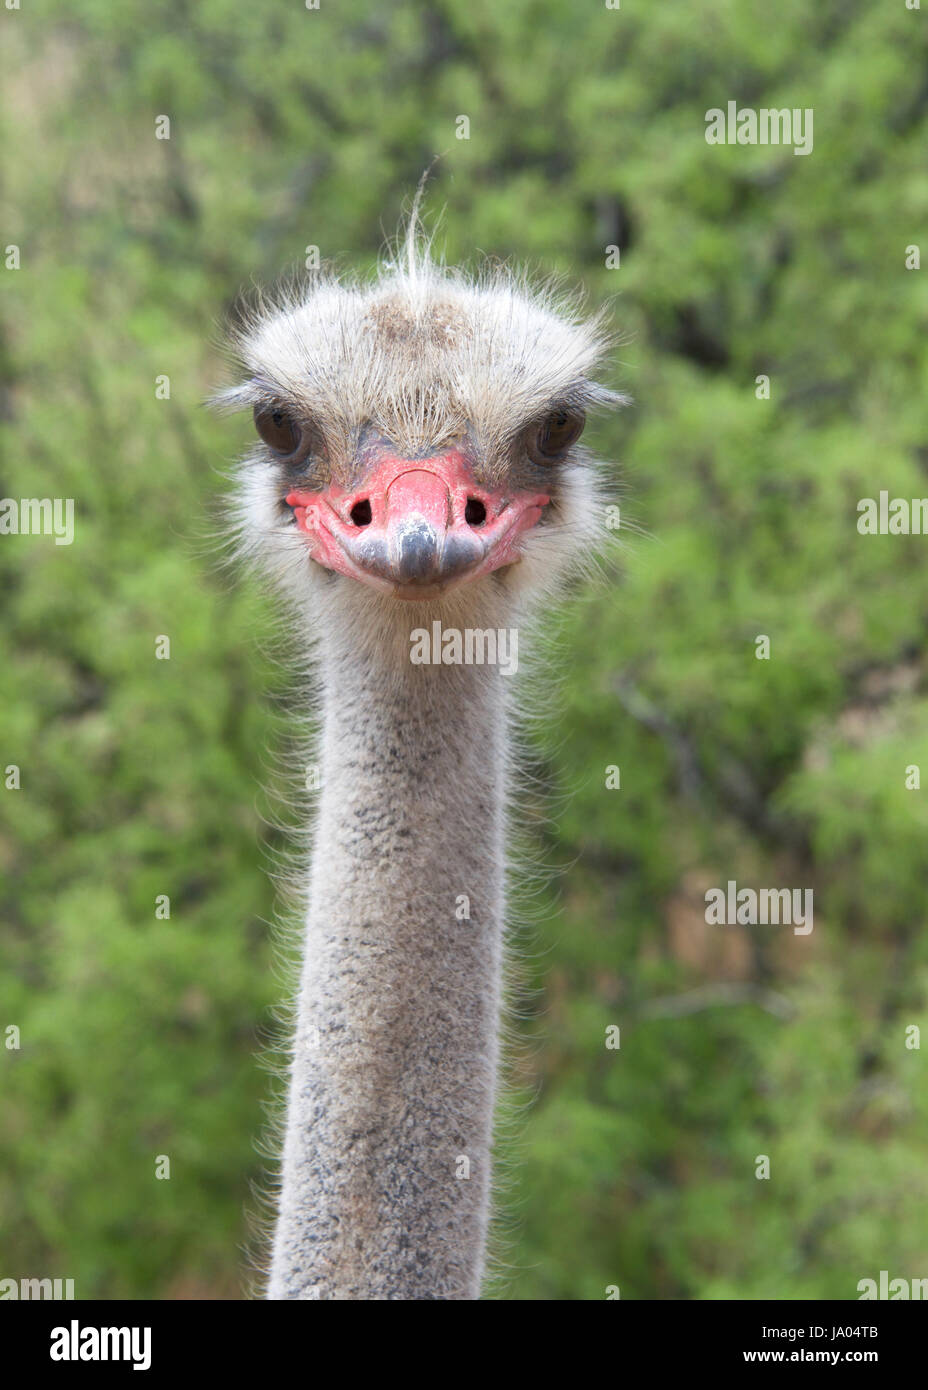 Portrait of one male ostrich looking directly at viewer, green bushes in background. The ostrich is a large flightless birds native to Africa. Males h Stock Photo